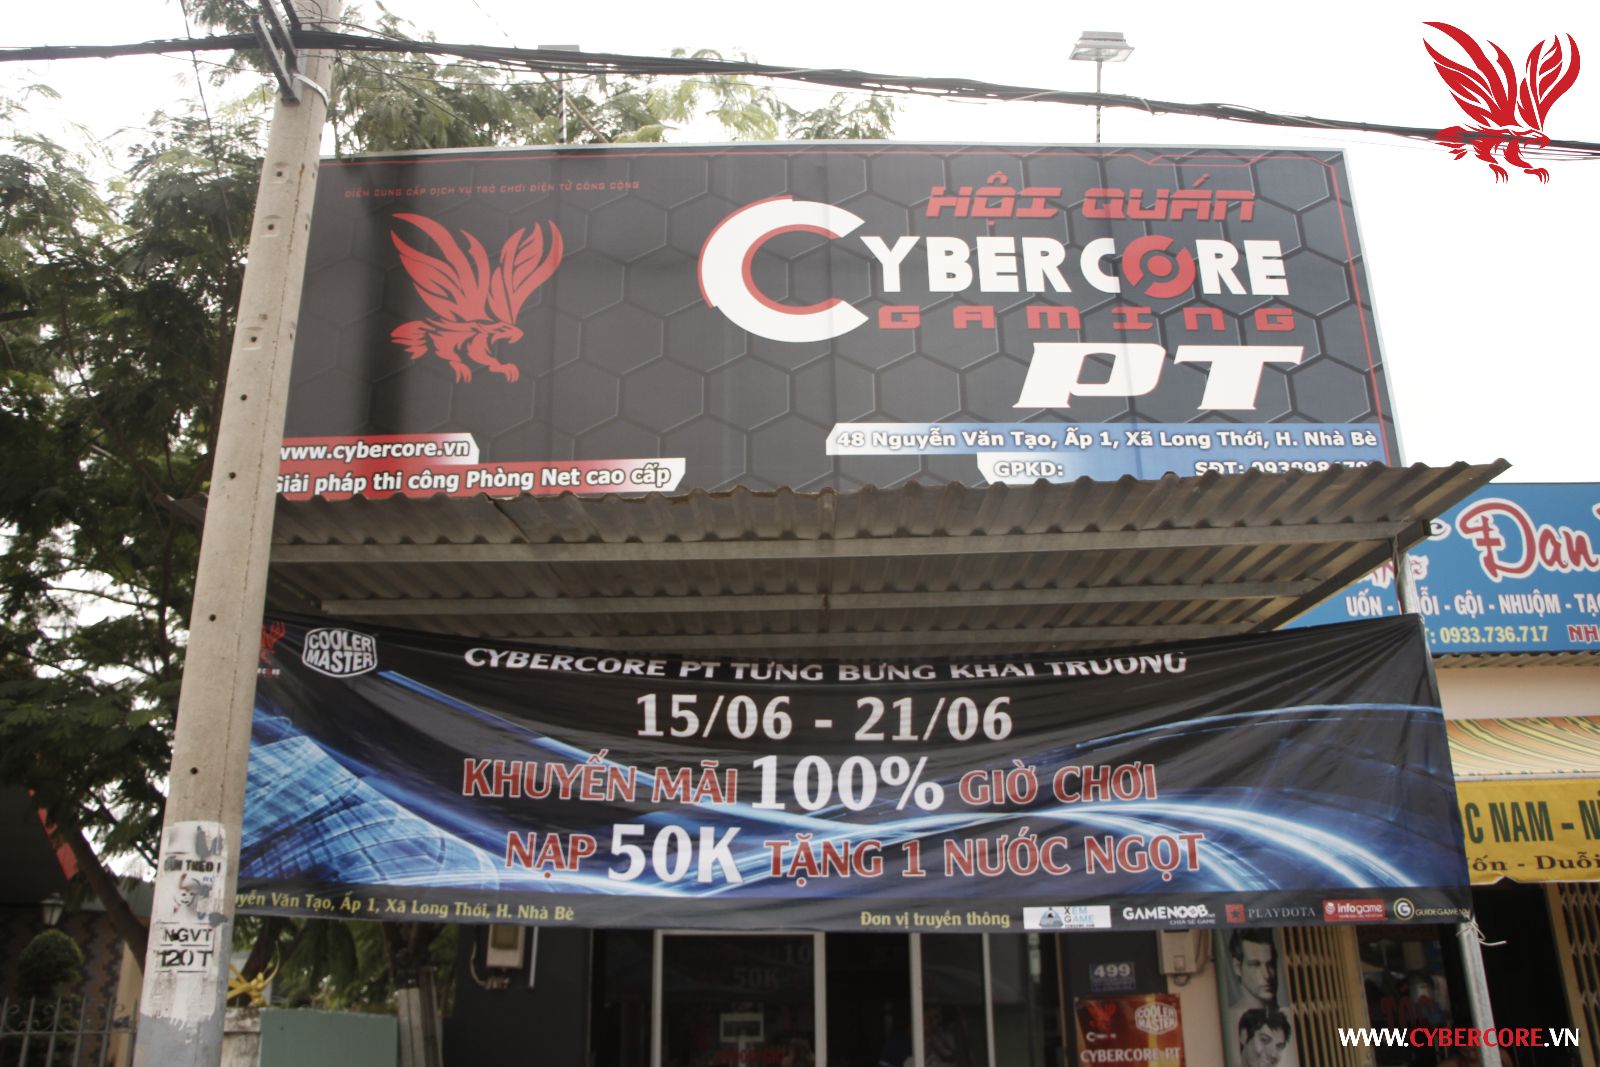 https://img-cdn.2game.vn/pictures/images/2015/6/23/cybercore_gaming_pt_1.JPG